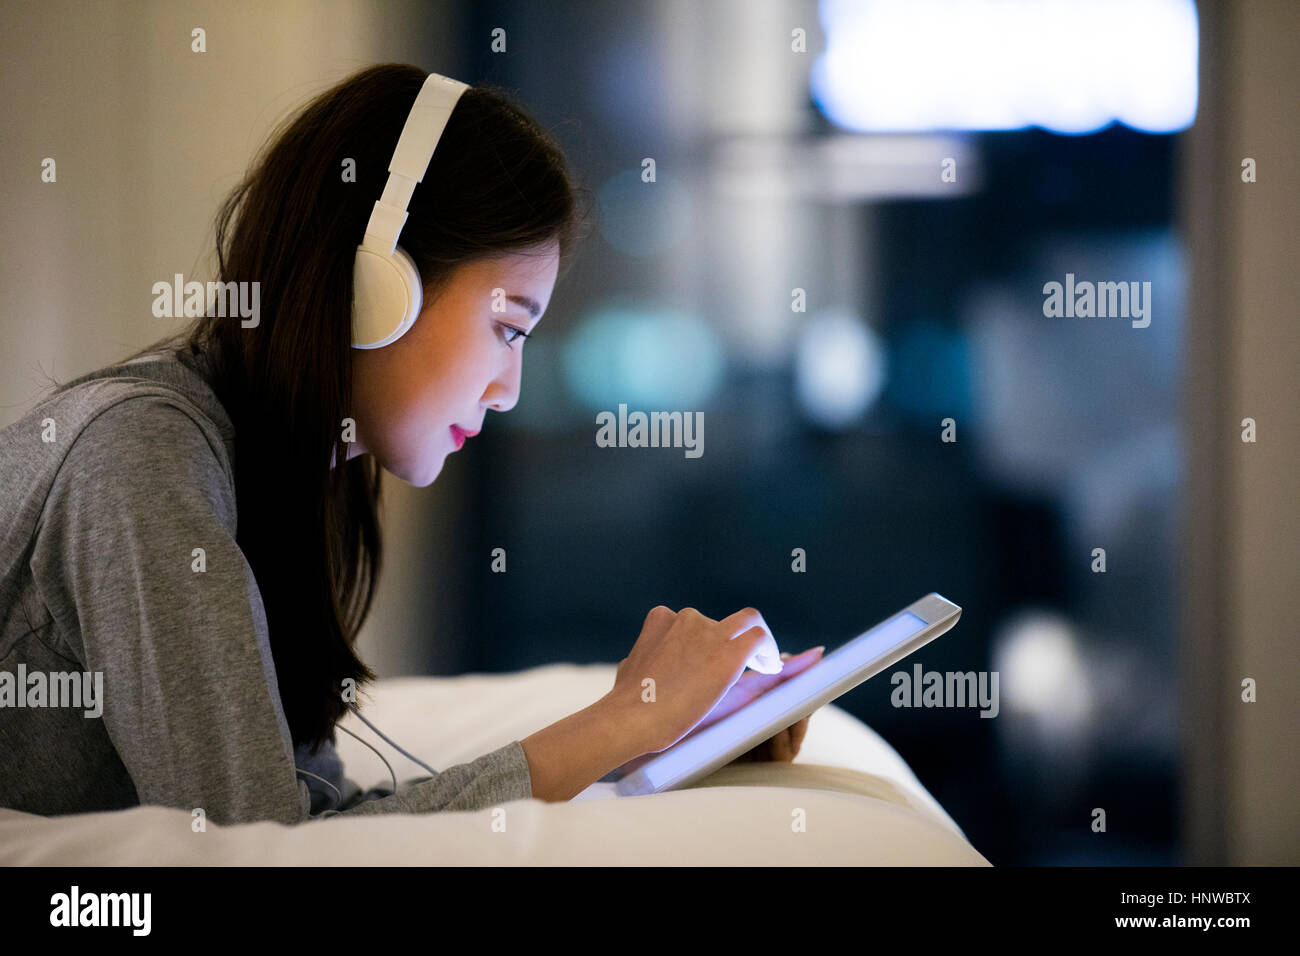 Woman using tablet at night Stock Photo